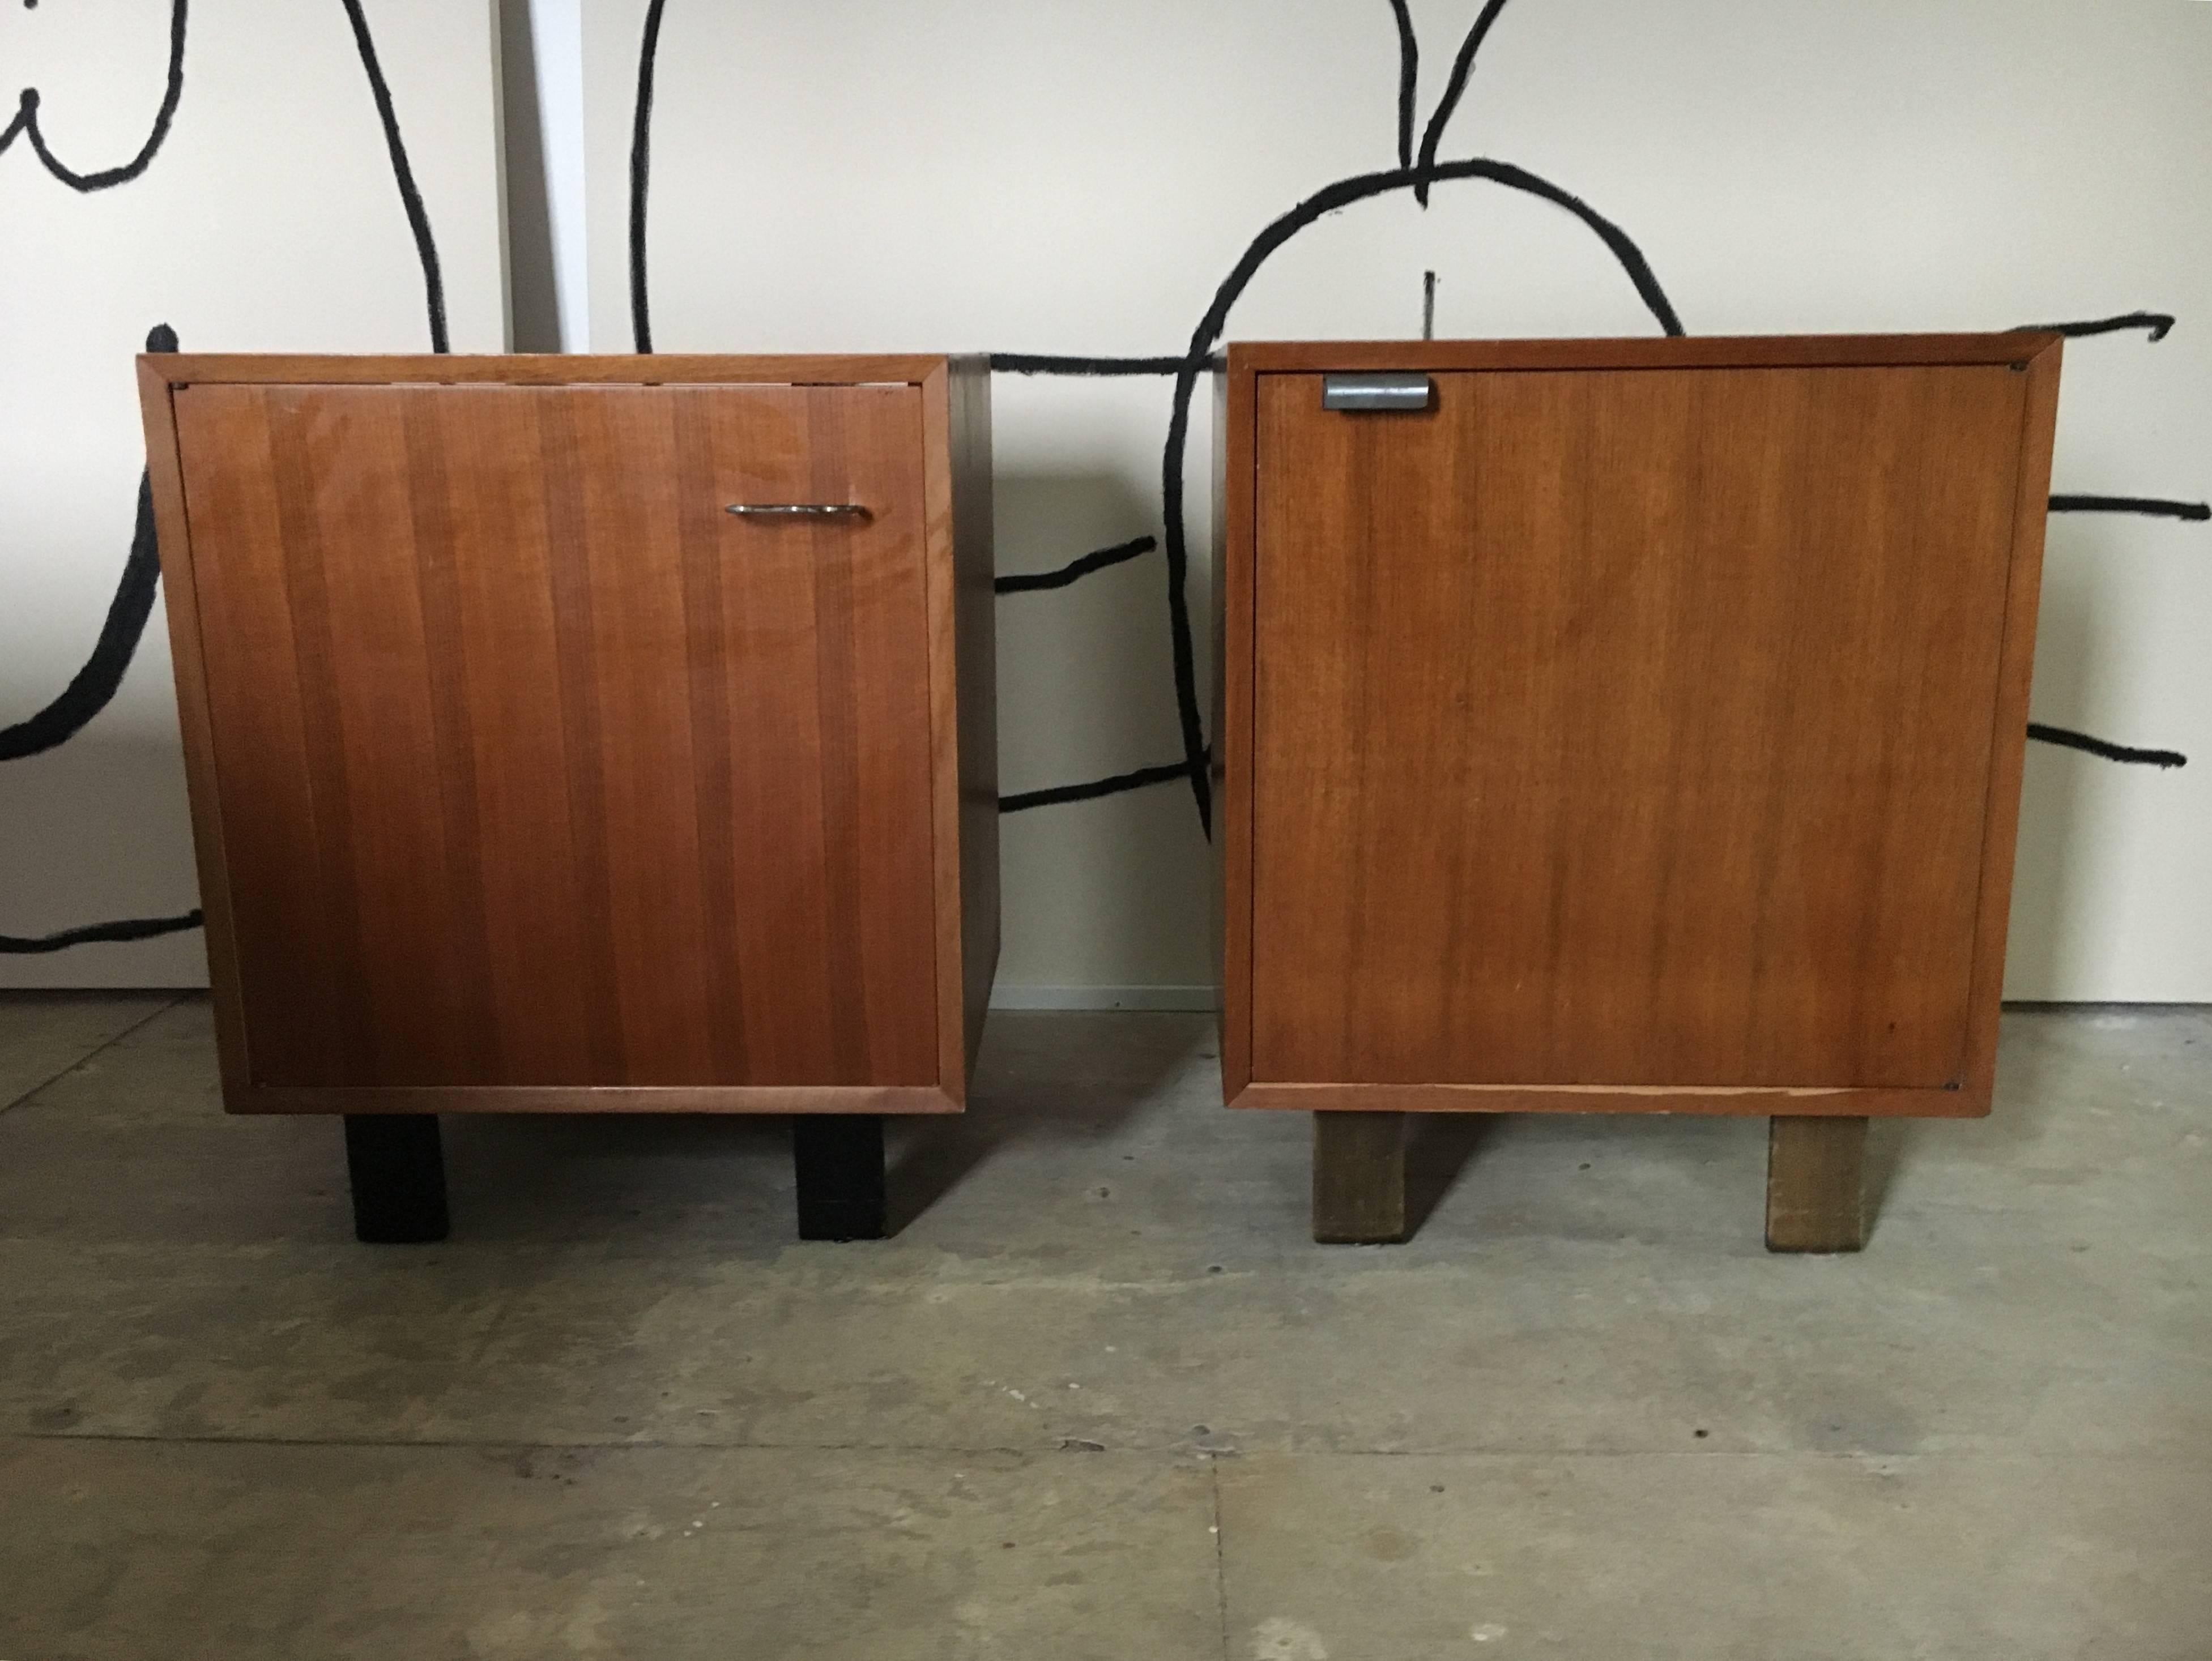 Pair of walnut cabinets designed by George Nelson for Herman Miller in 1948.
One shelf each, the right cabinet has a J-handle and the left one a M-handle.